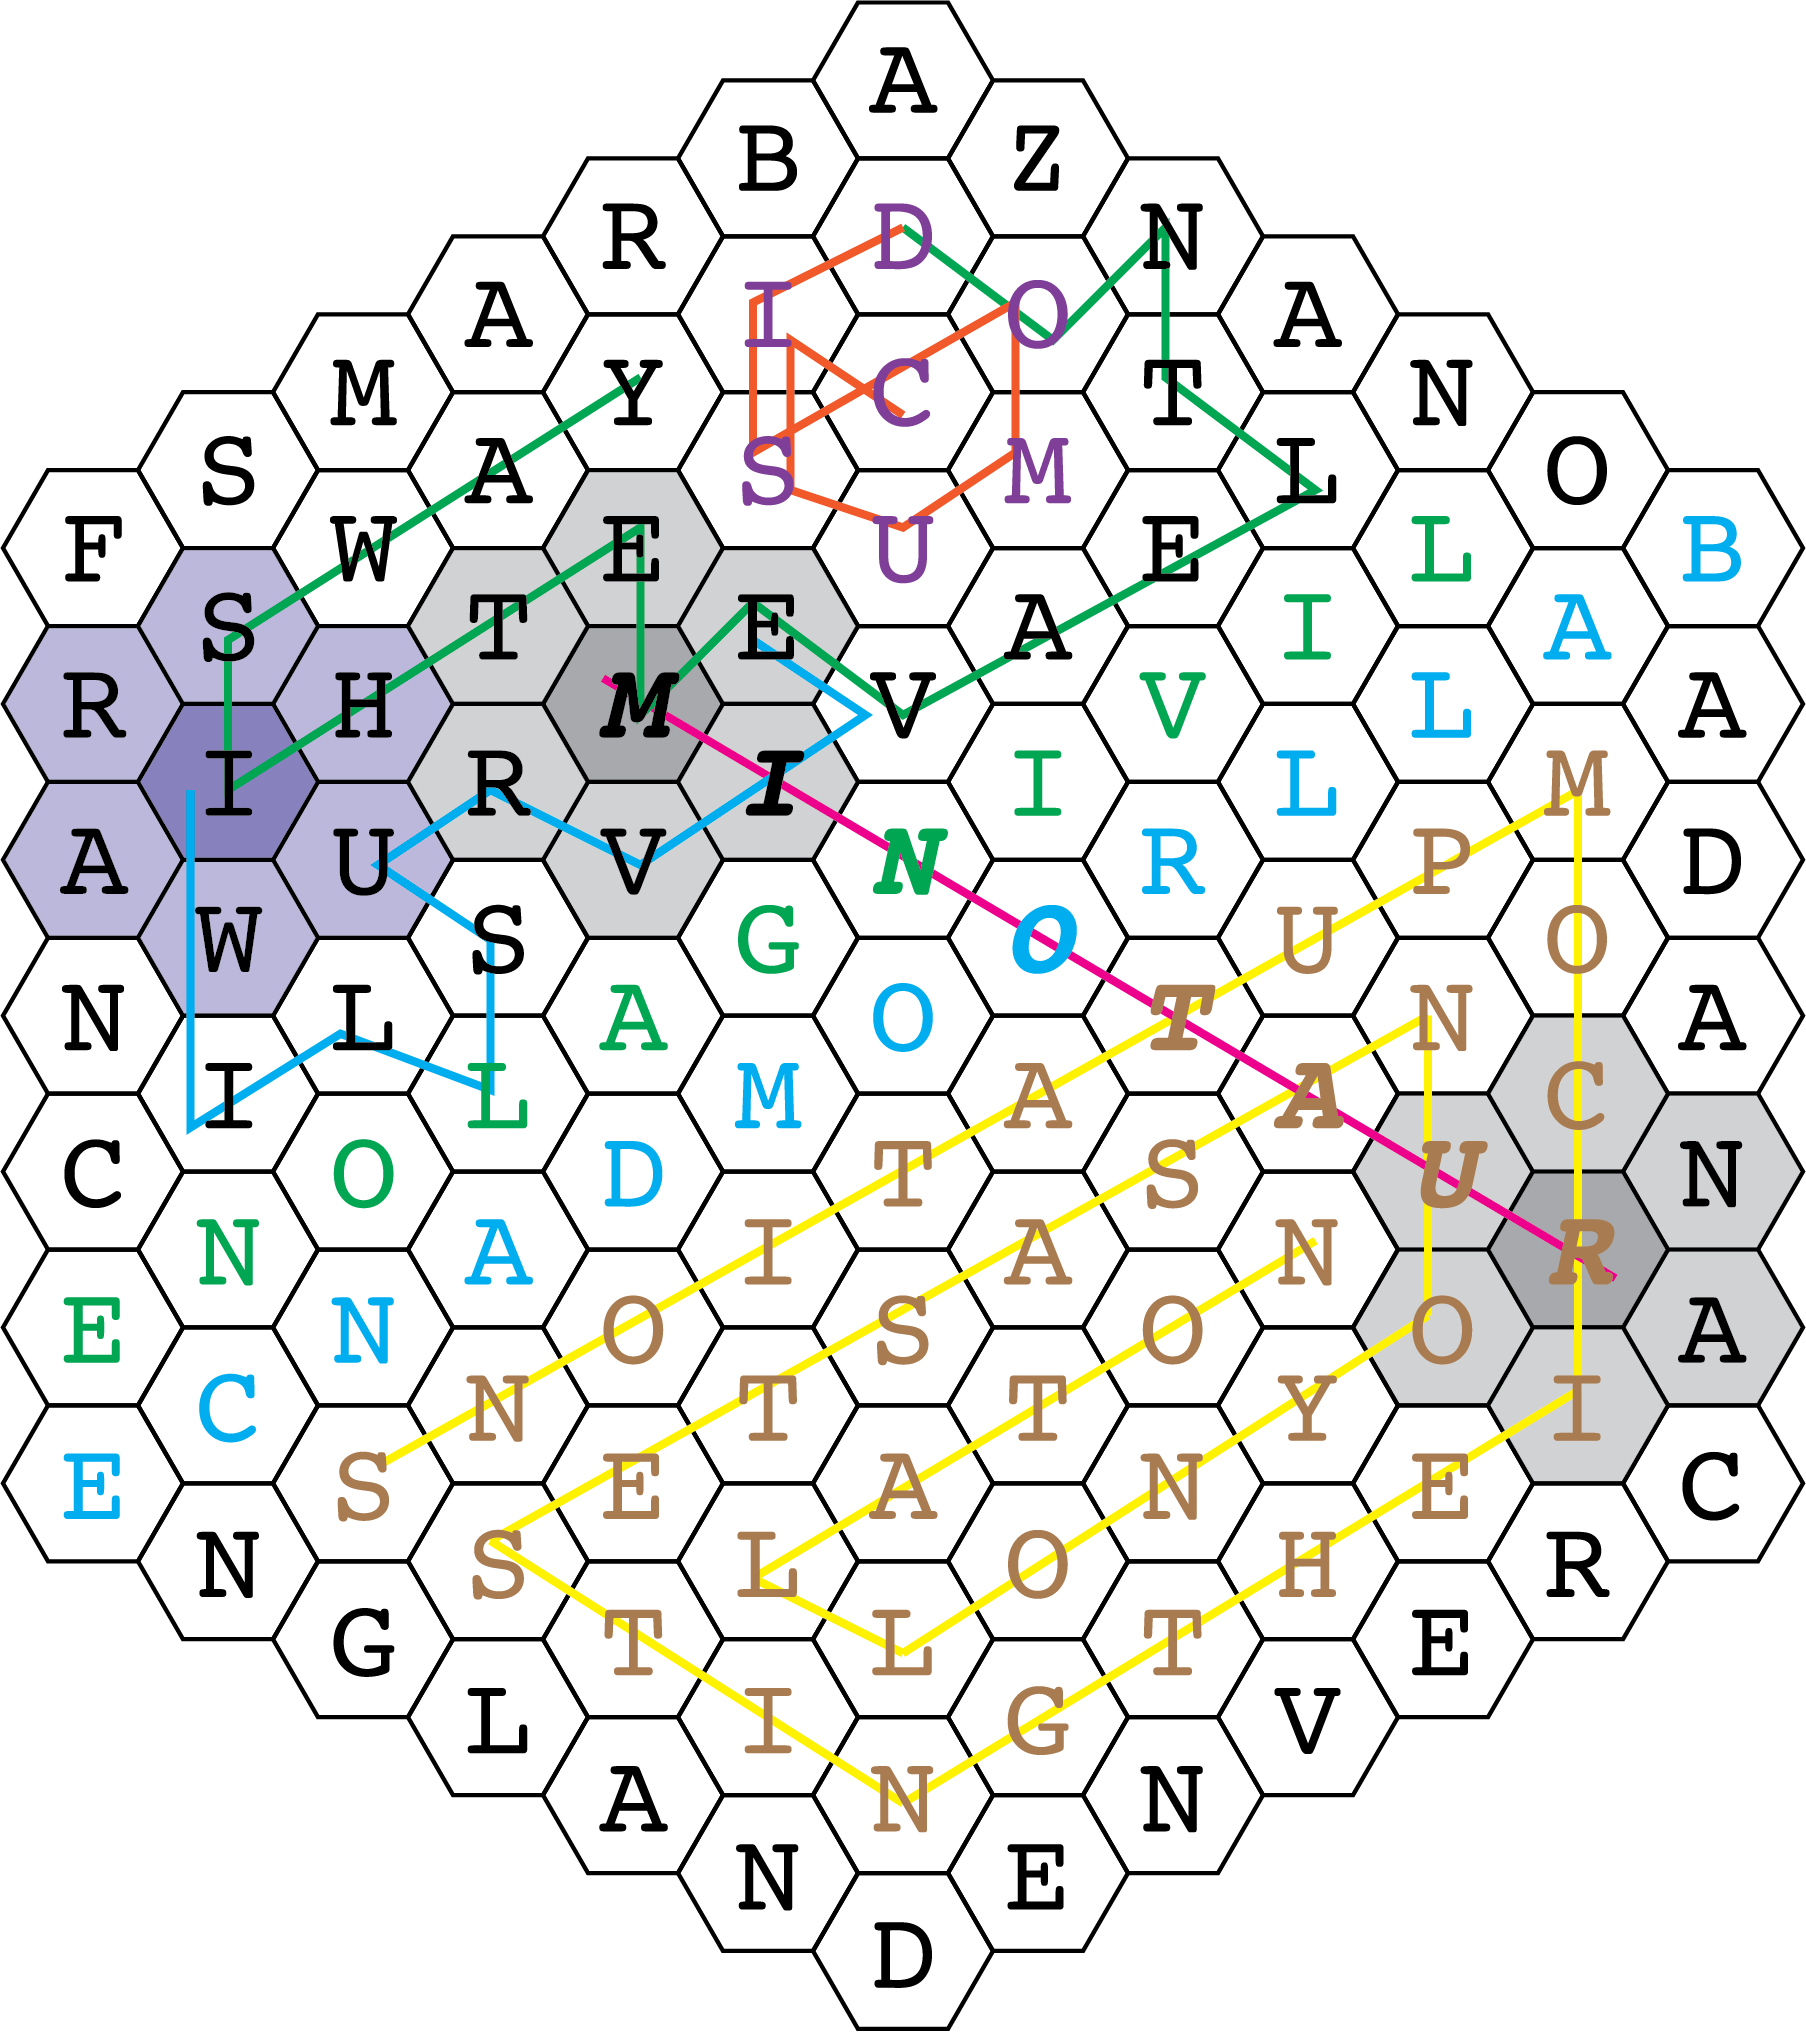 [hex grid with lines and letters in color]